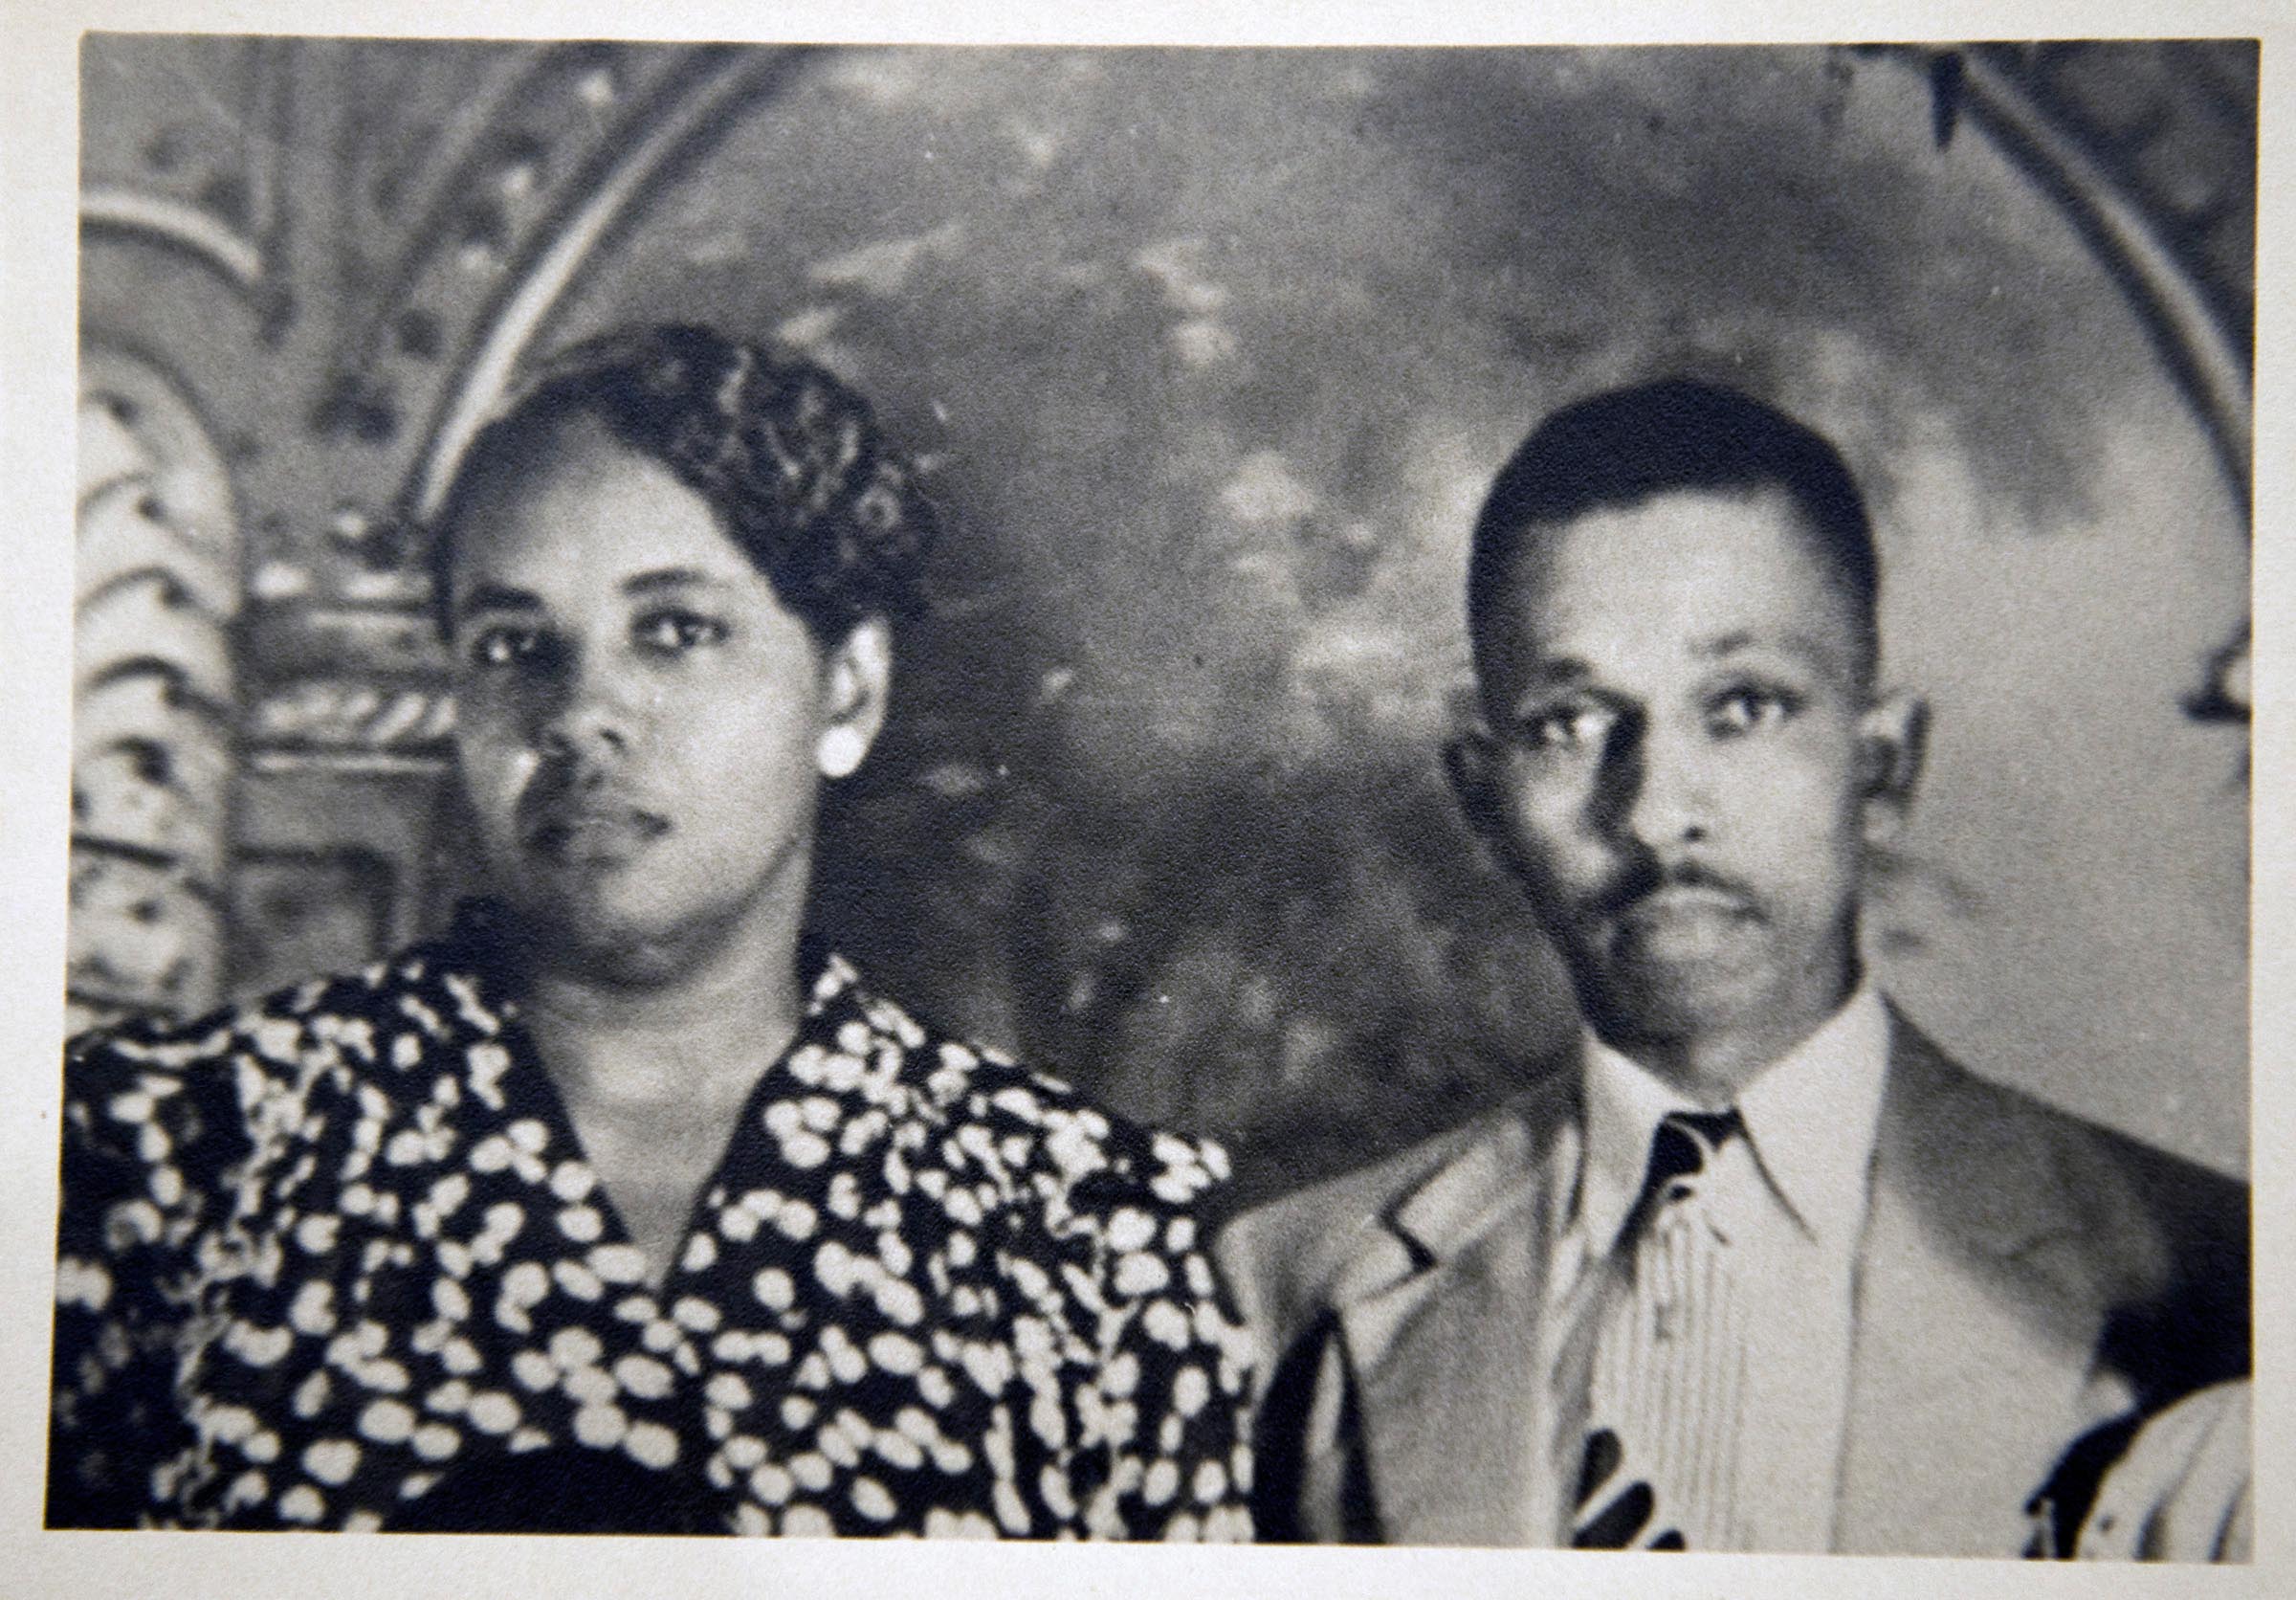 Black and white image featuring a woman and man.